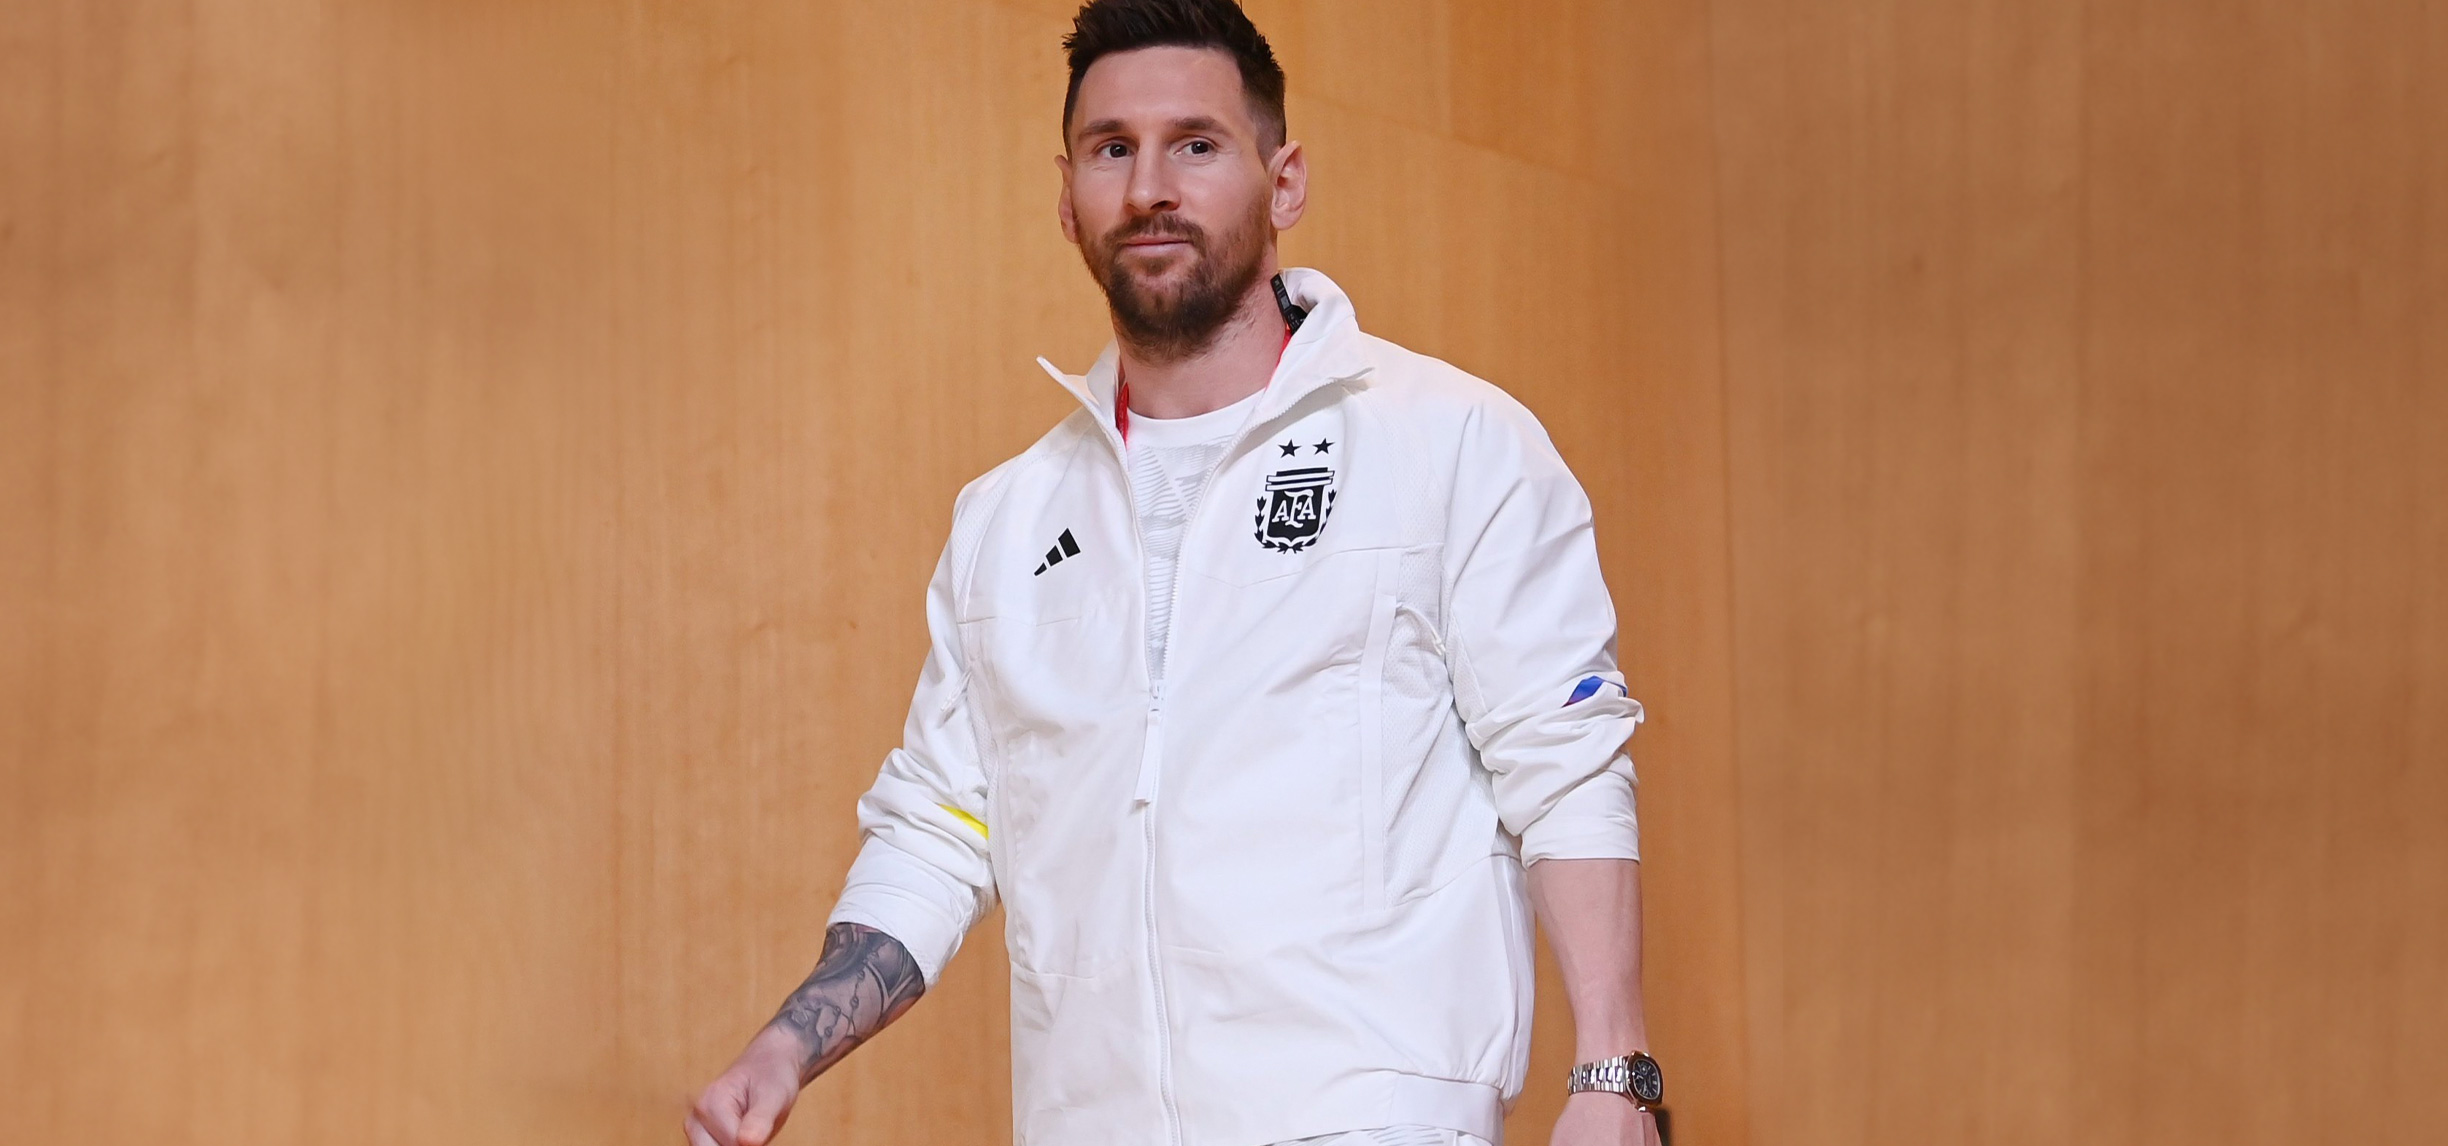 Lionel Messi Wore a Stunning Louis Vuitton Watch to Win the Ballon